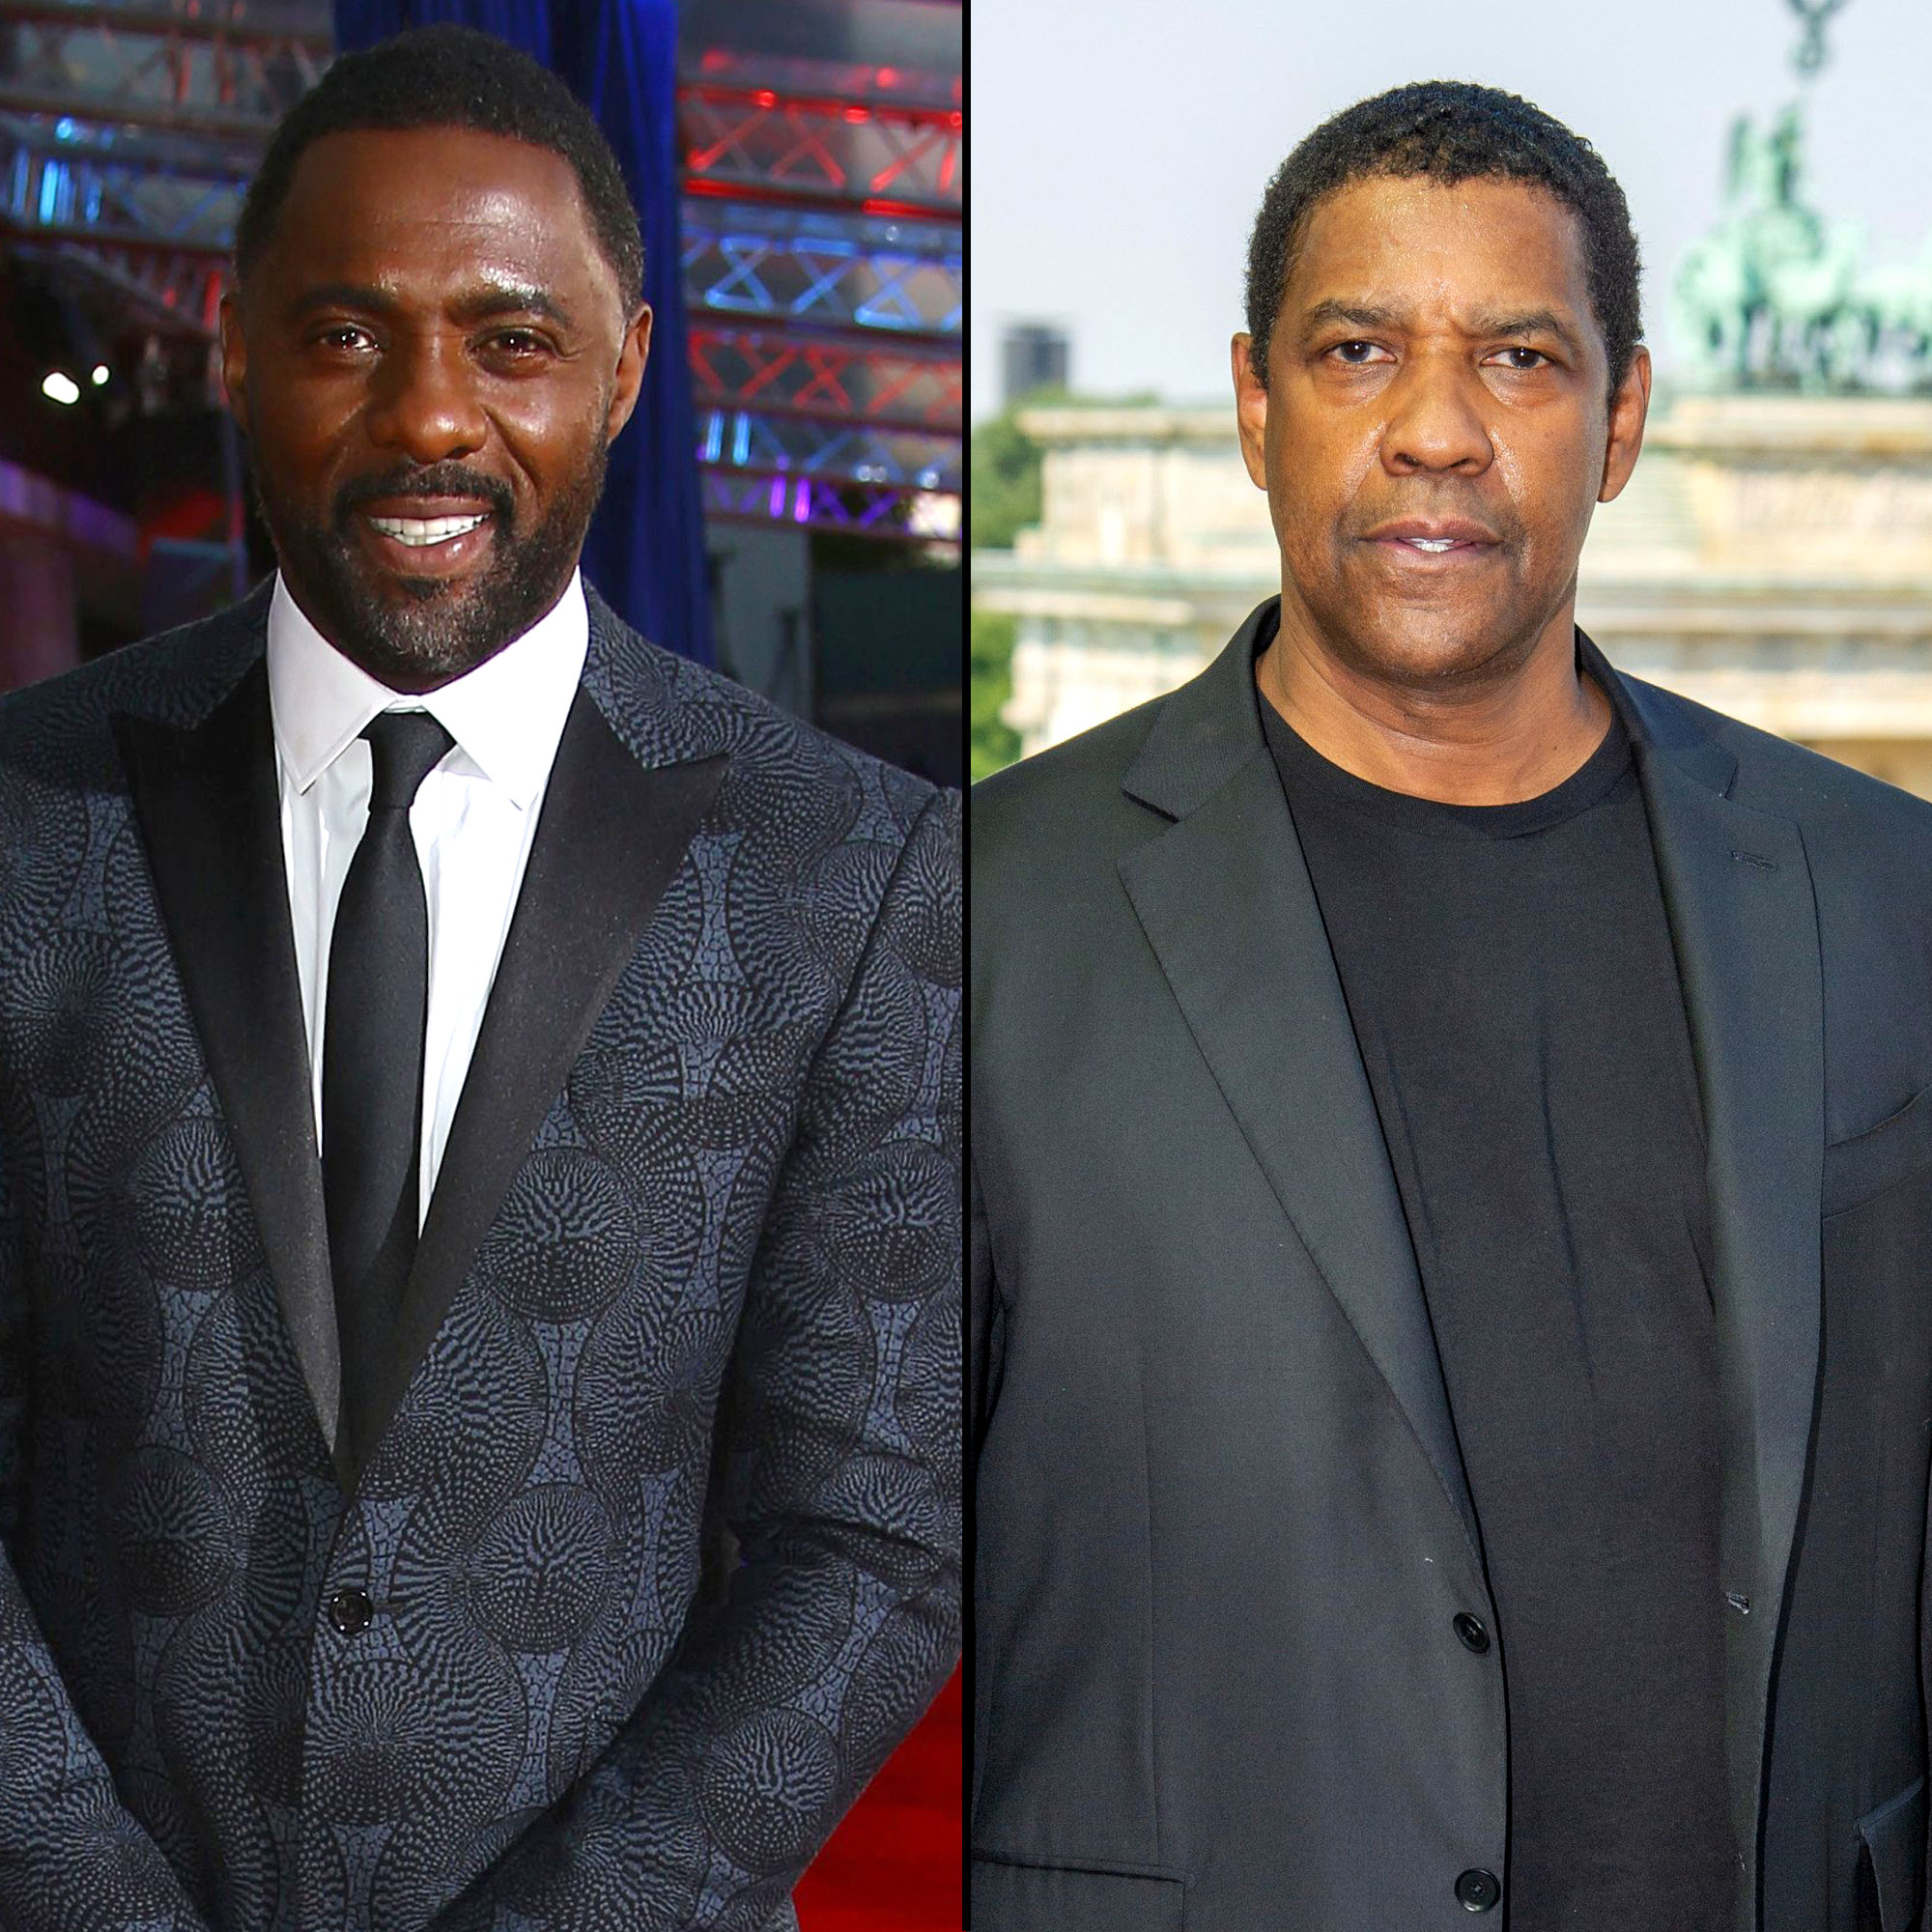 https://www.usmagazine.com/wp-content/uploads/2021/11/Idris-Elba-Thought-Denzel-Washington-Really-Shot-Him-While-Filming-American-Gangster.jpg?quality=55&strip=all